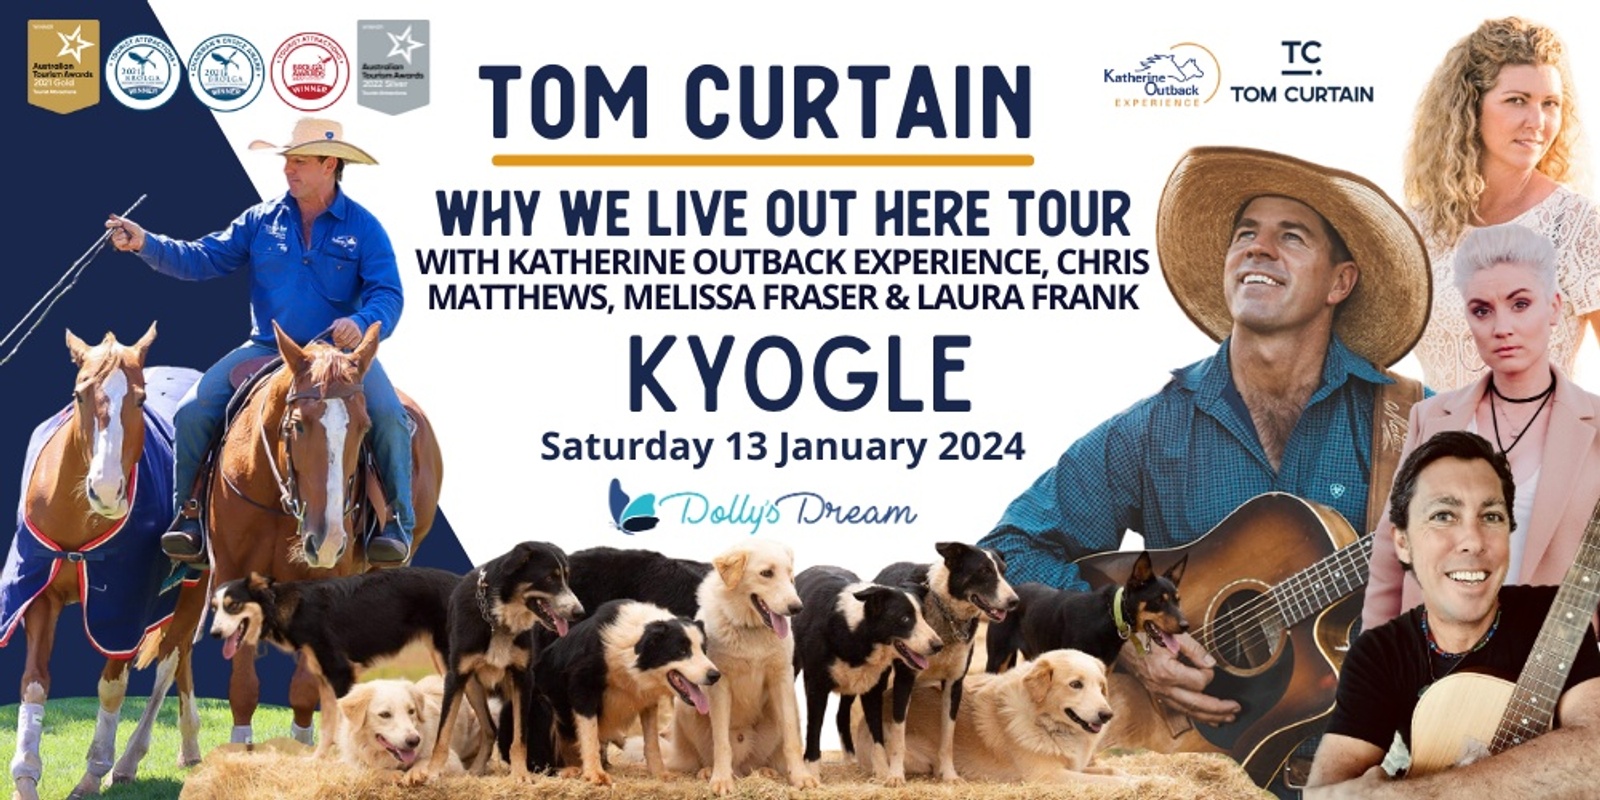 Banner image for Tom Curtain Tour - KYOGLE, NSW